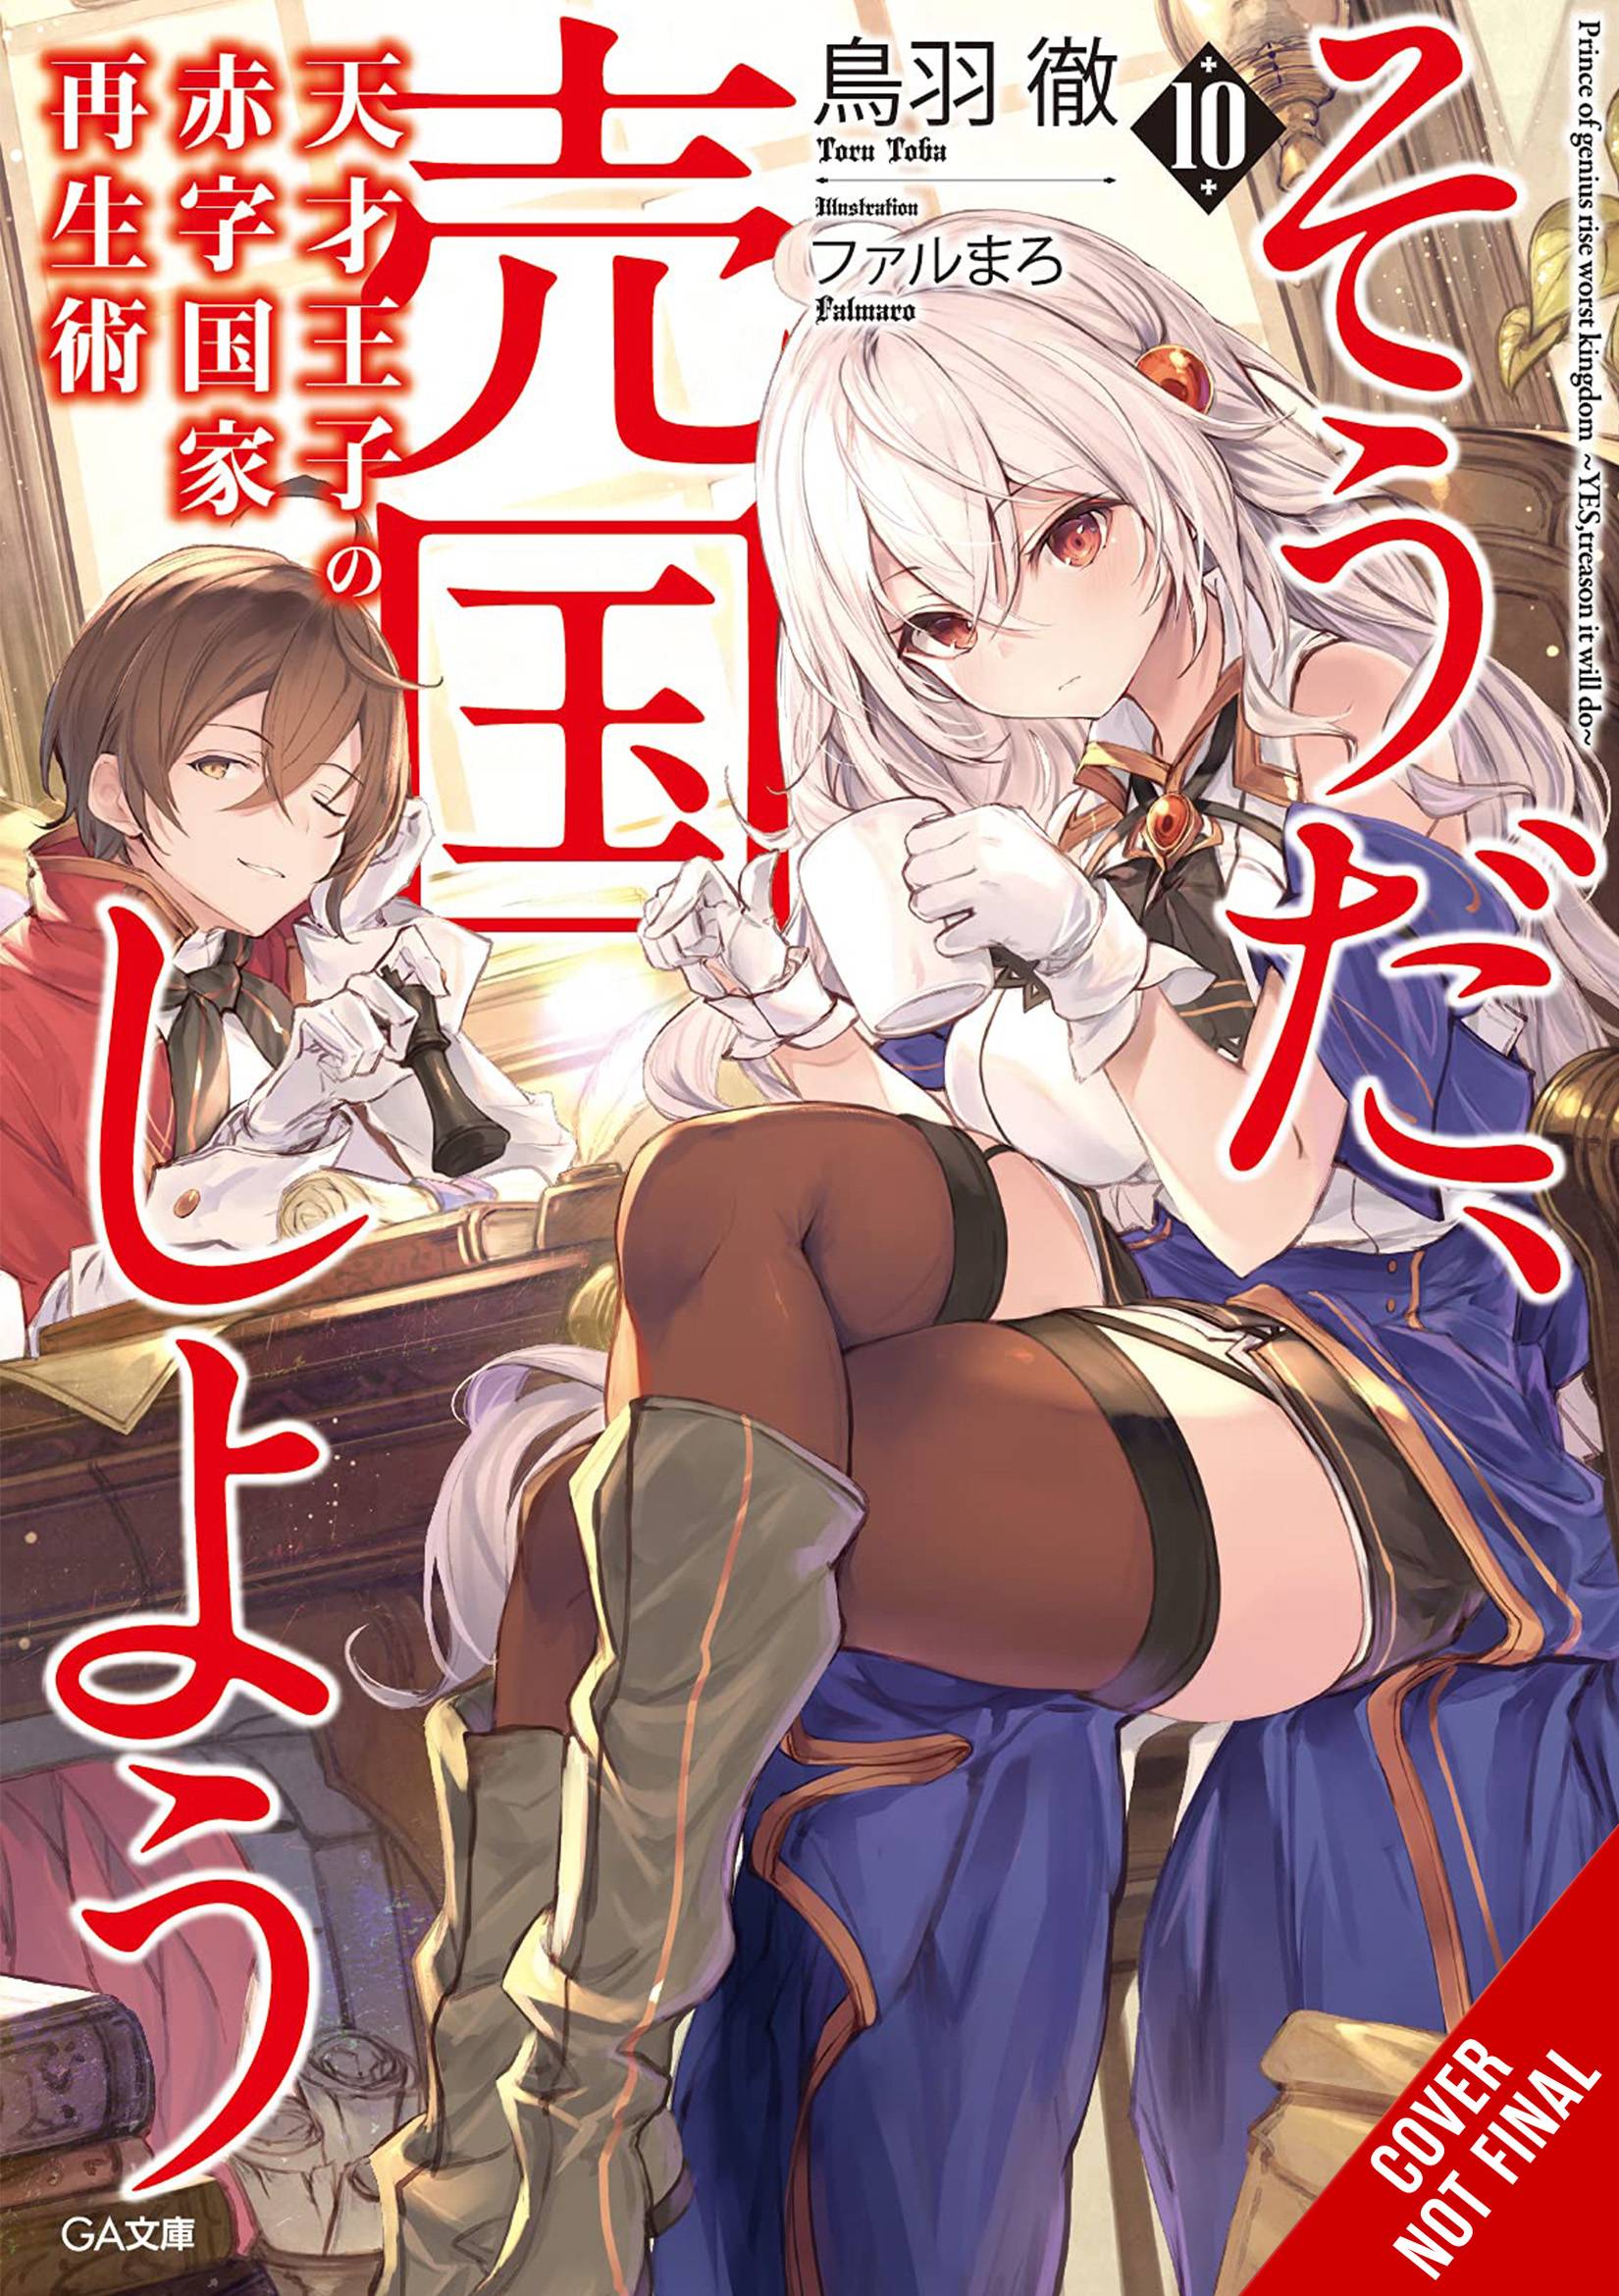 Qoo News] “The Genius Prince's Guide to Raising a Nation Out of Debt” Light  Novels Confirms TV Anime